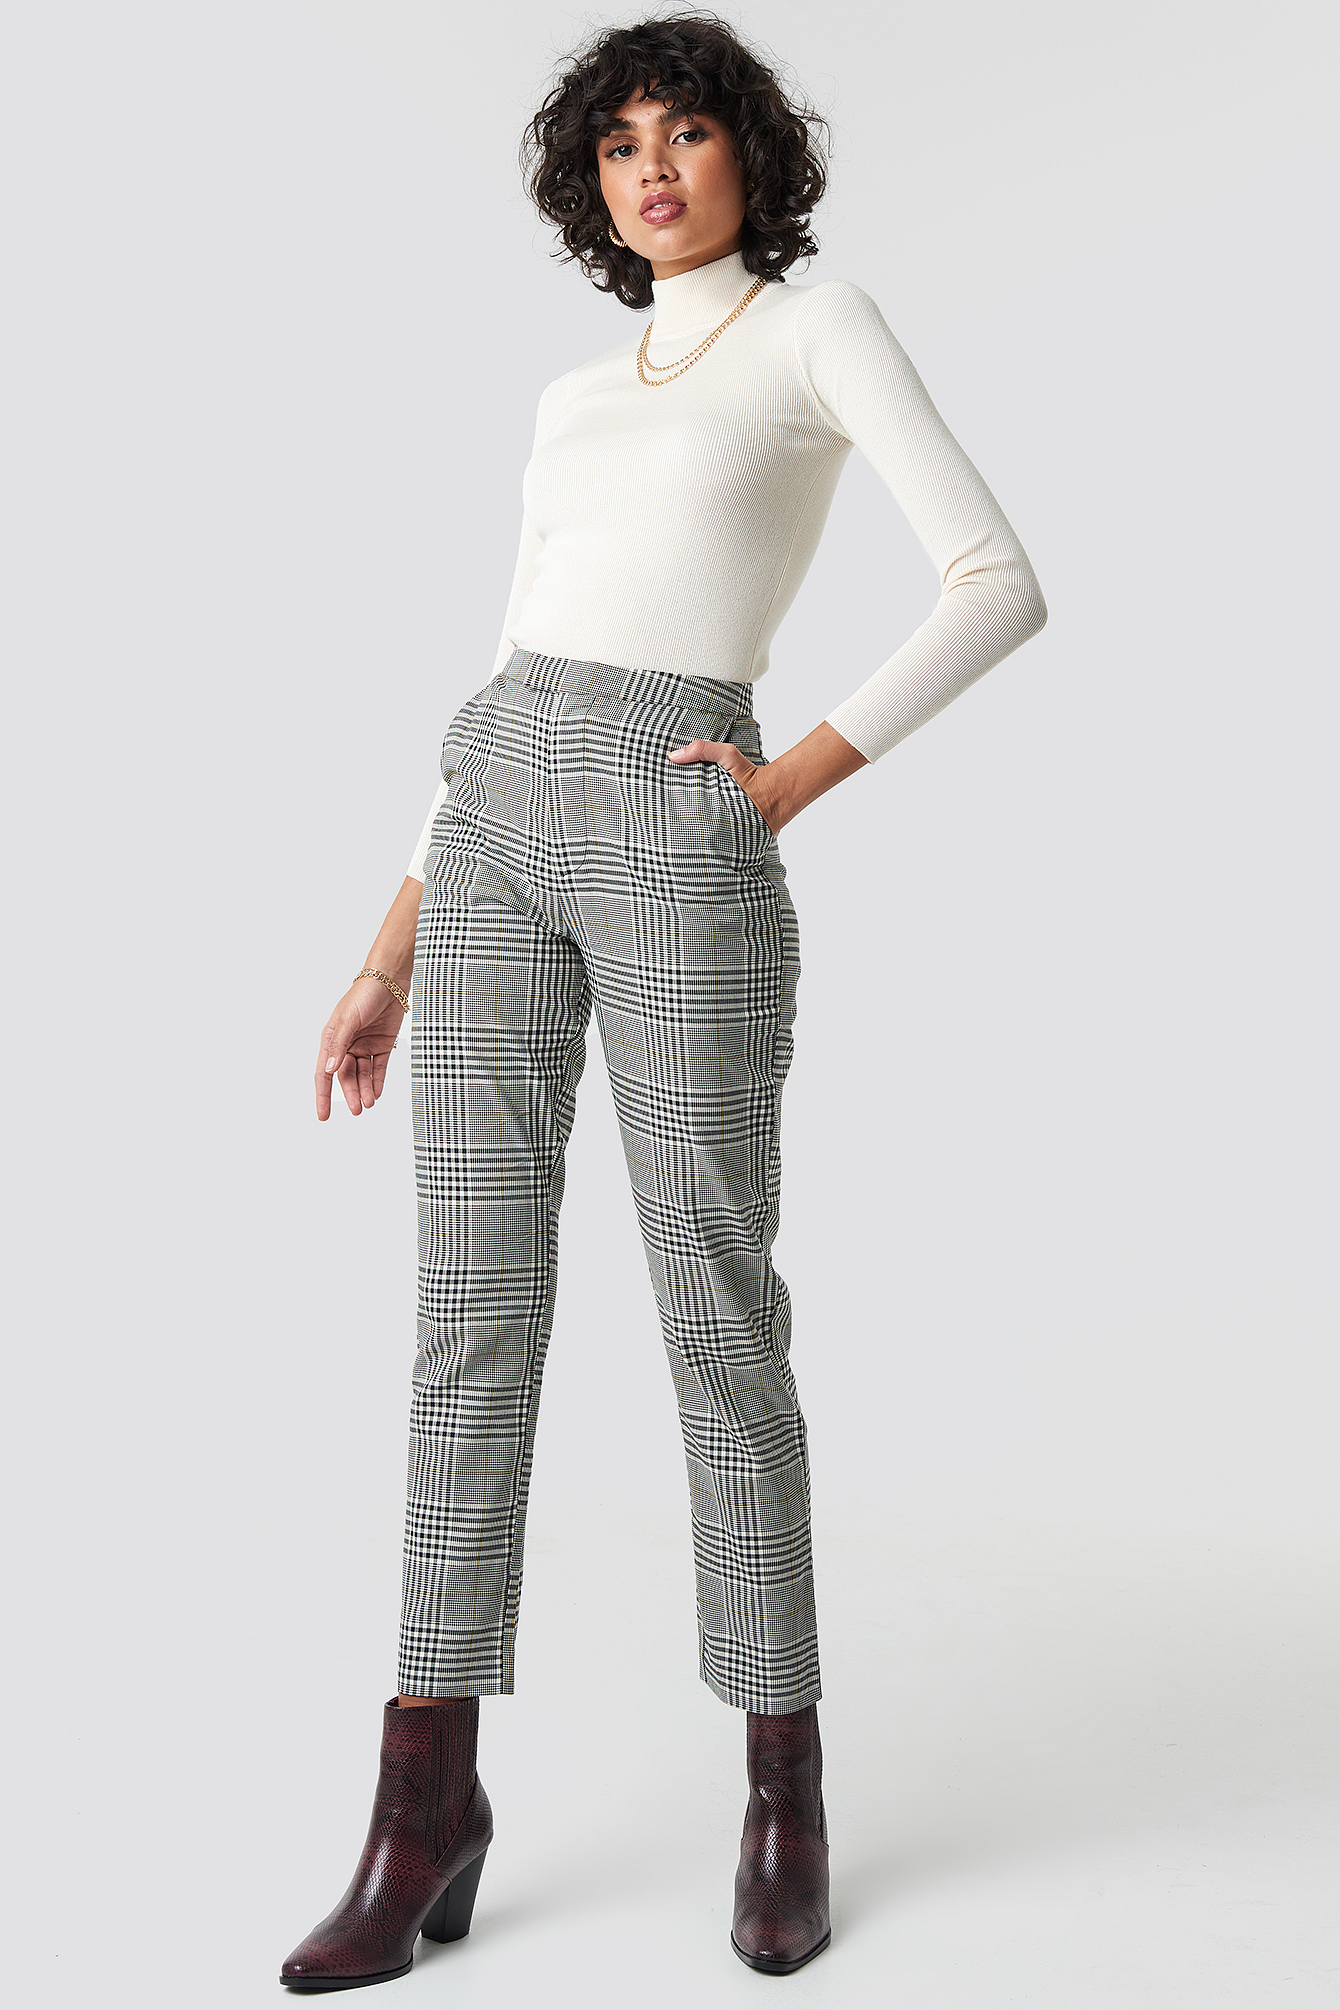 grey checkered pants outfit